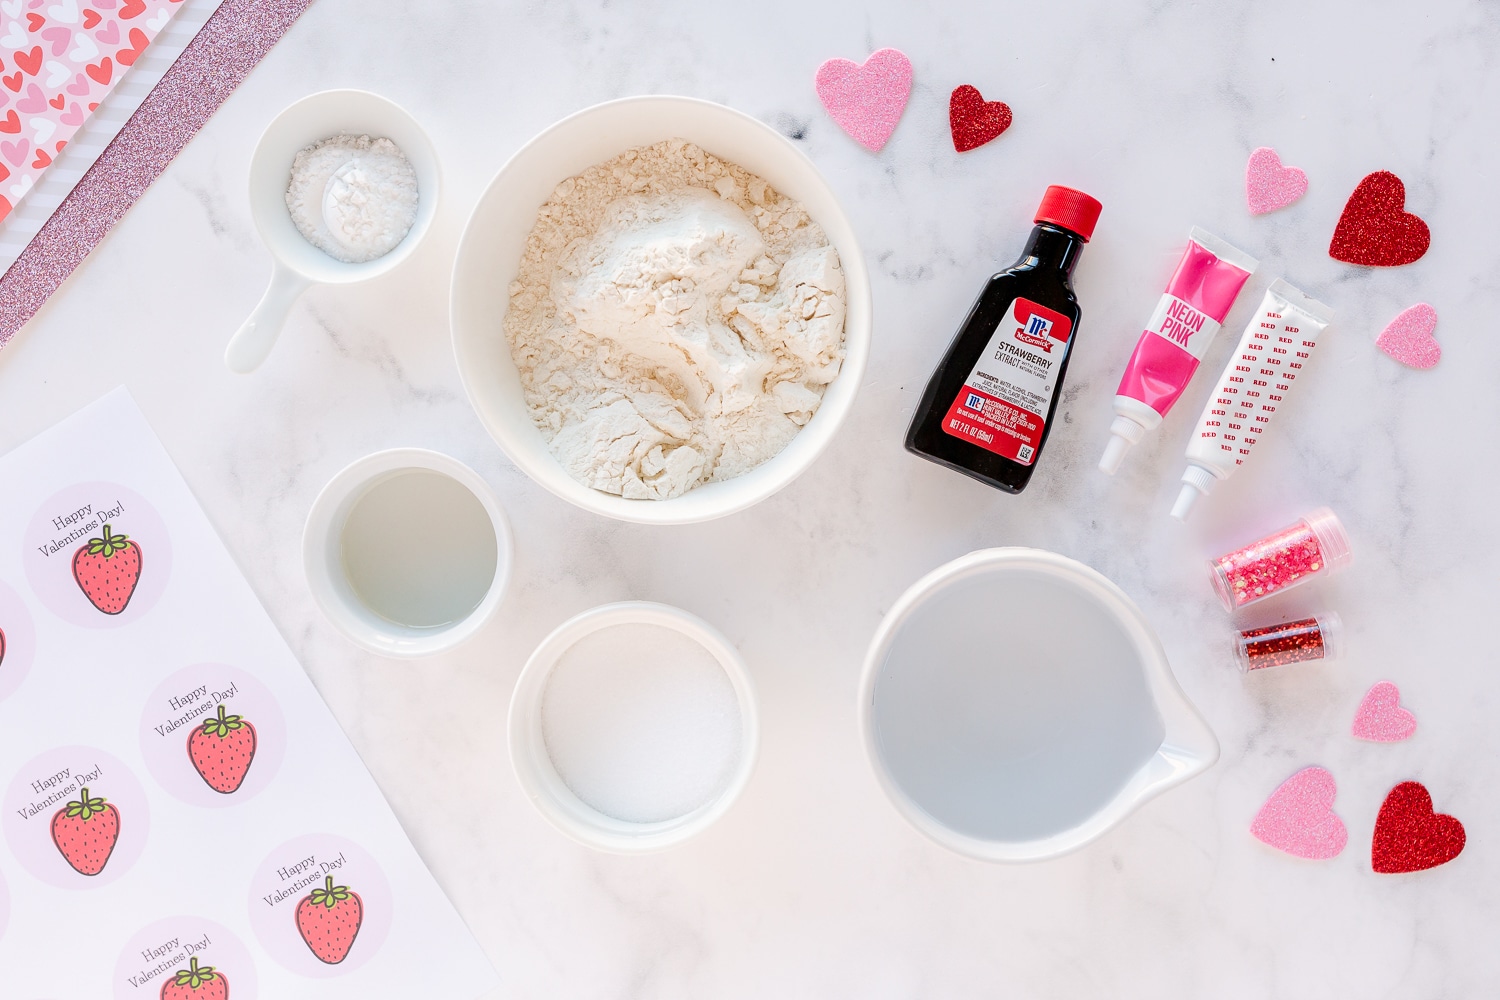 ingredients needed for strawberry playdough